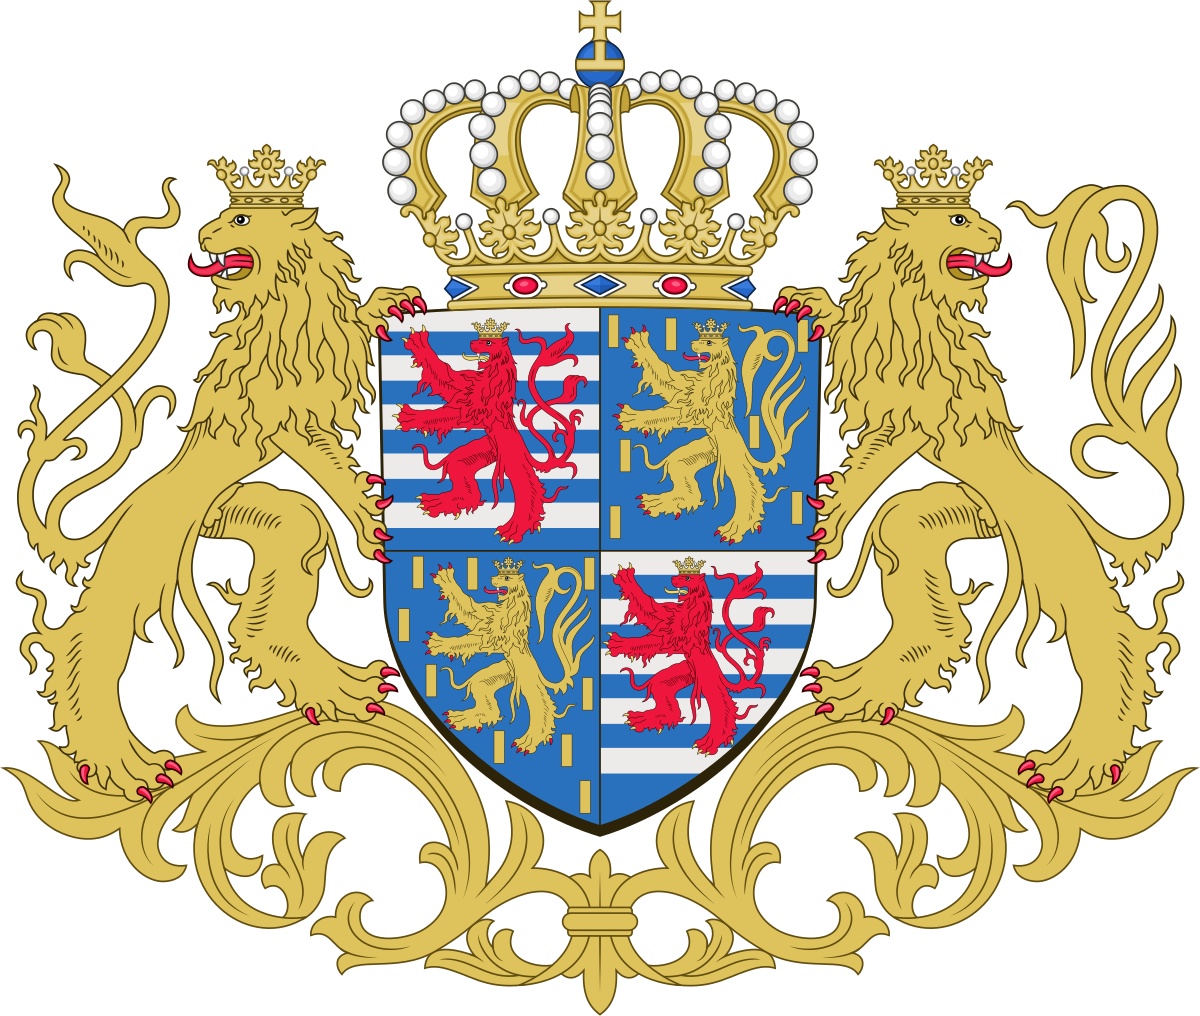 A Coat Of Arms With Lions And Crown